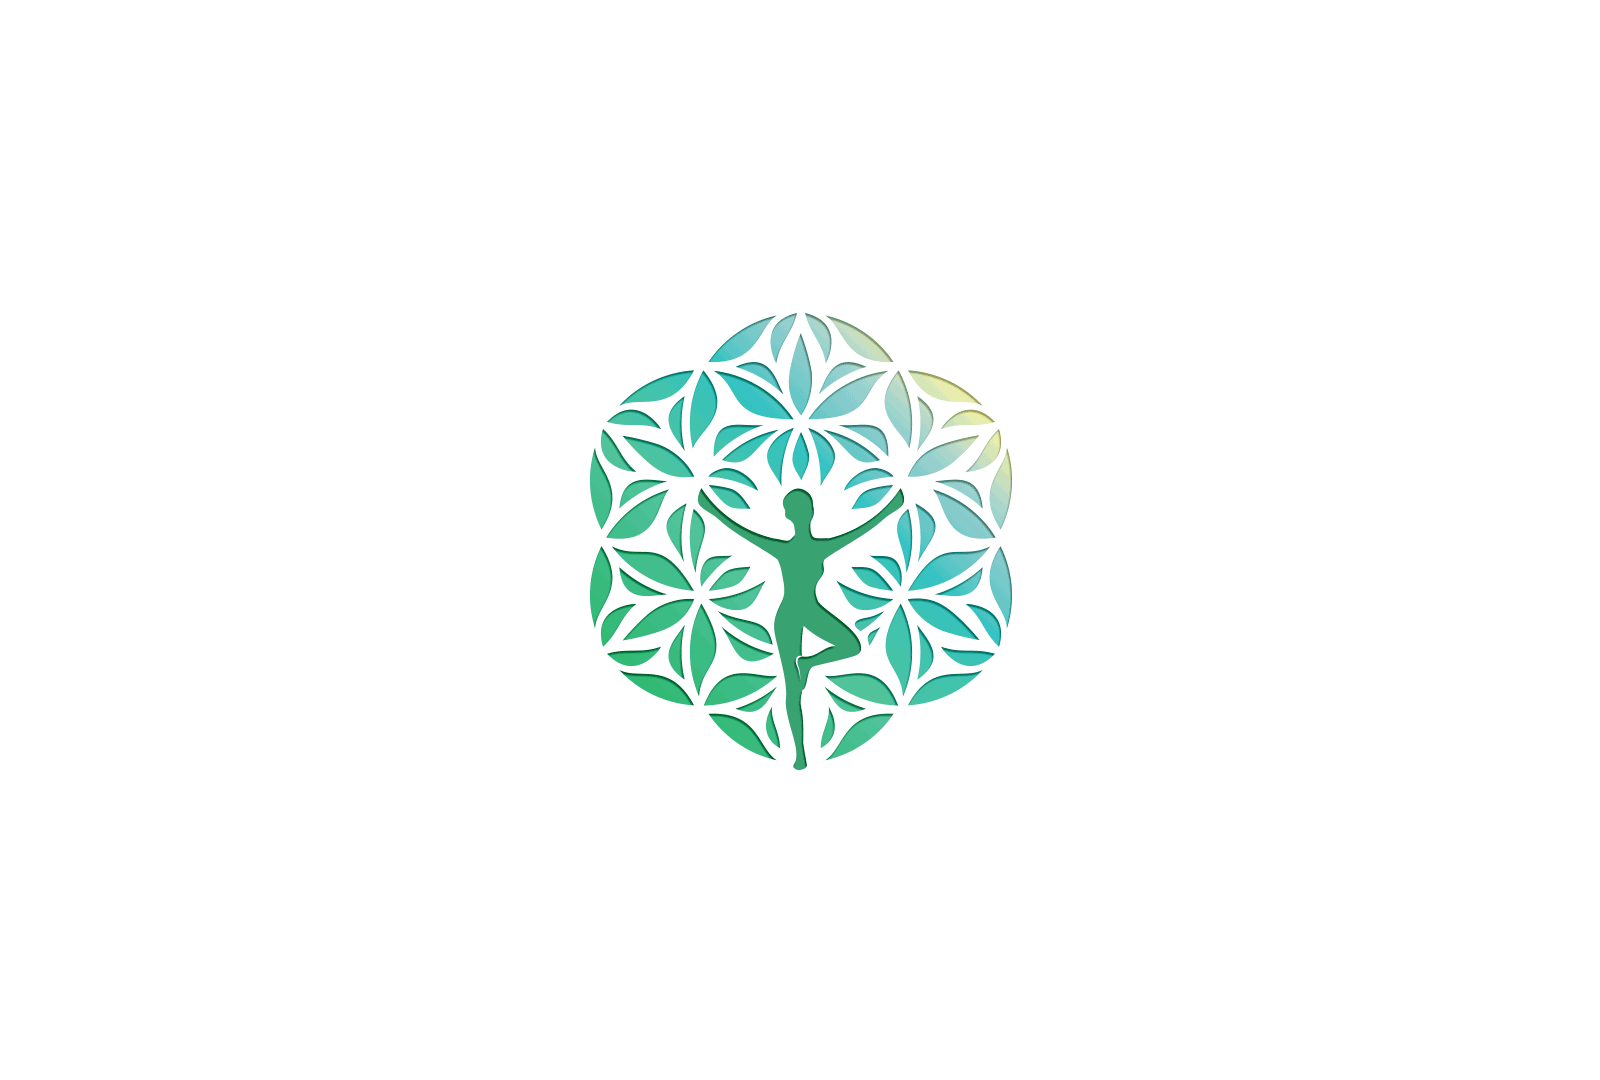 Seed Of Life Tree Logo FOR SALE"